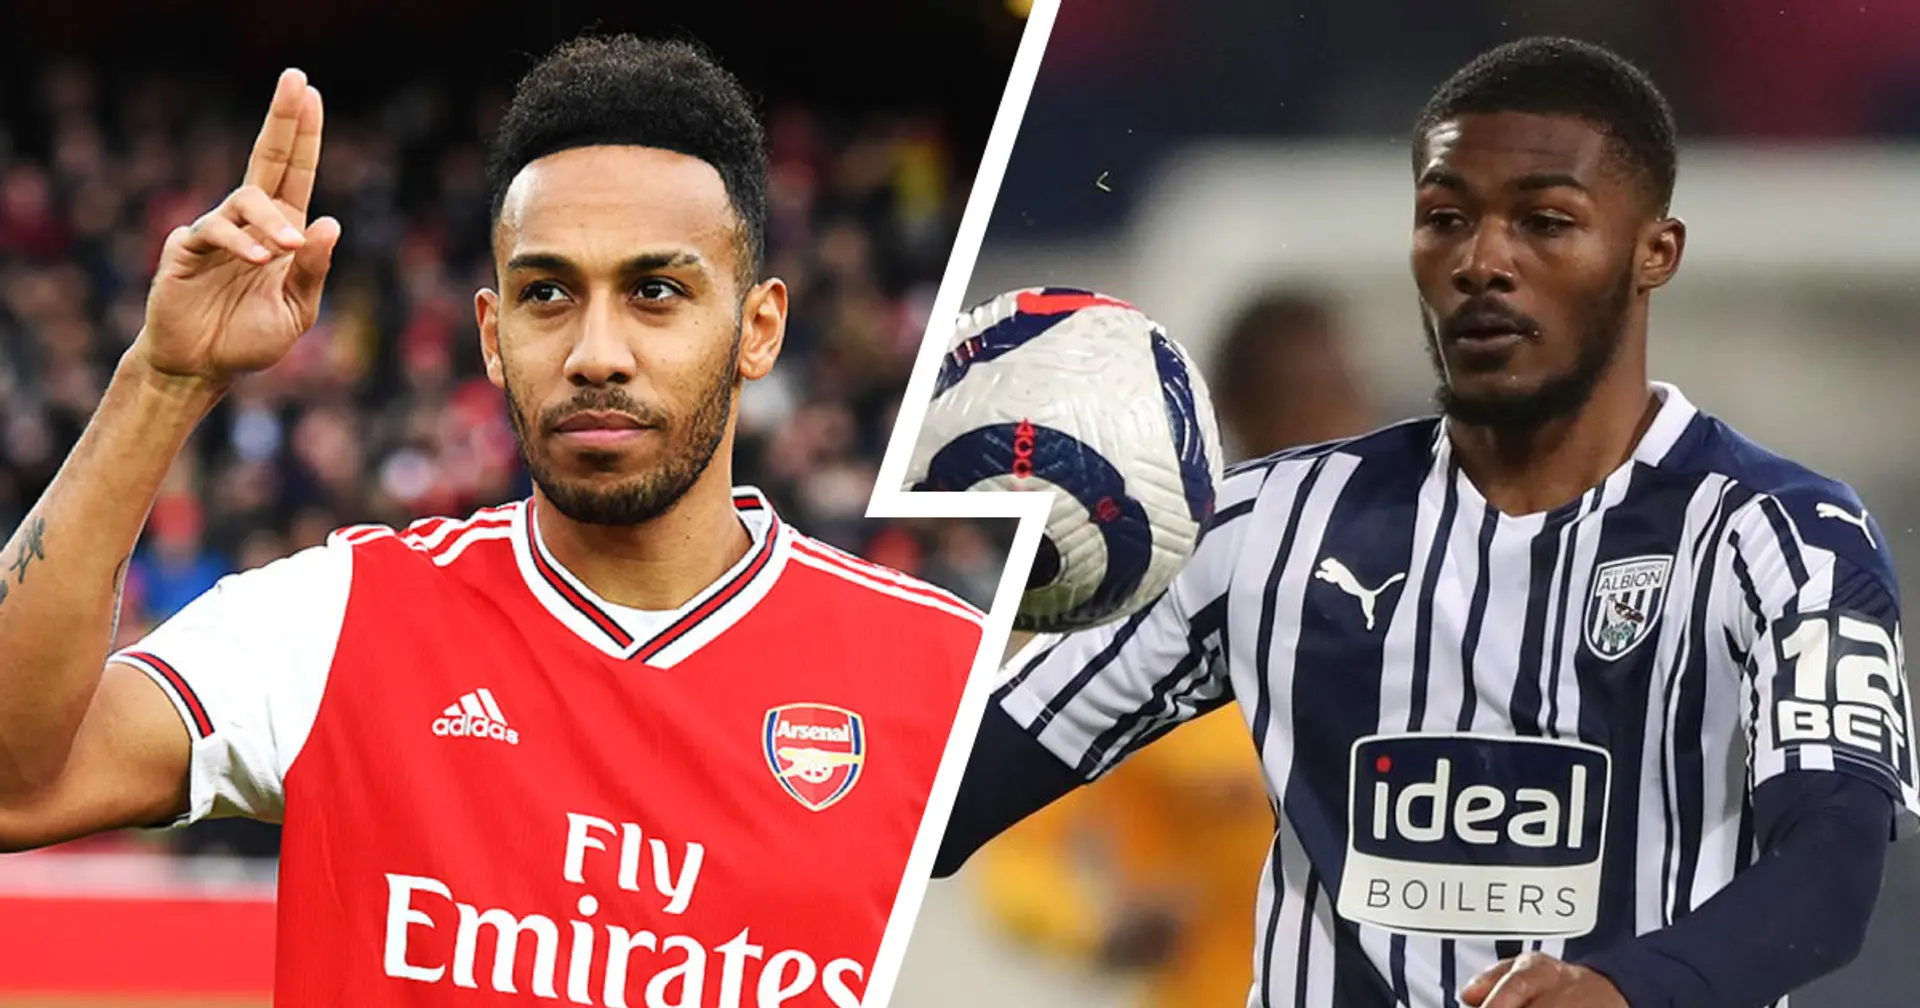 Injuries, suspensions & manager's comments ahead of Arsenal vs West Brom clash